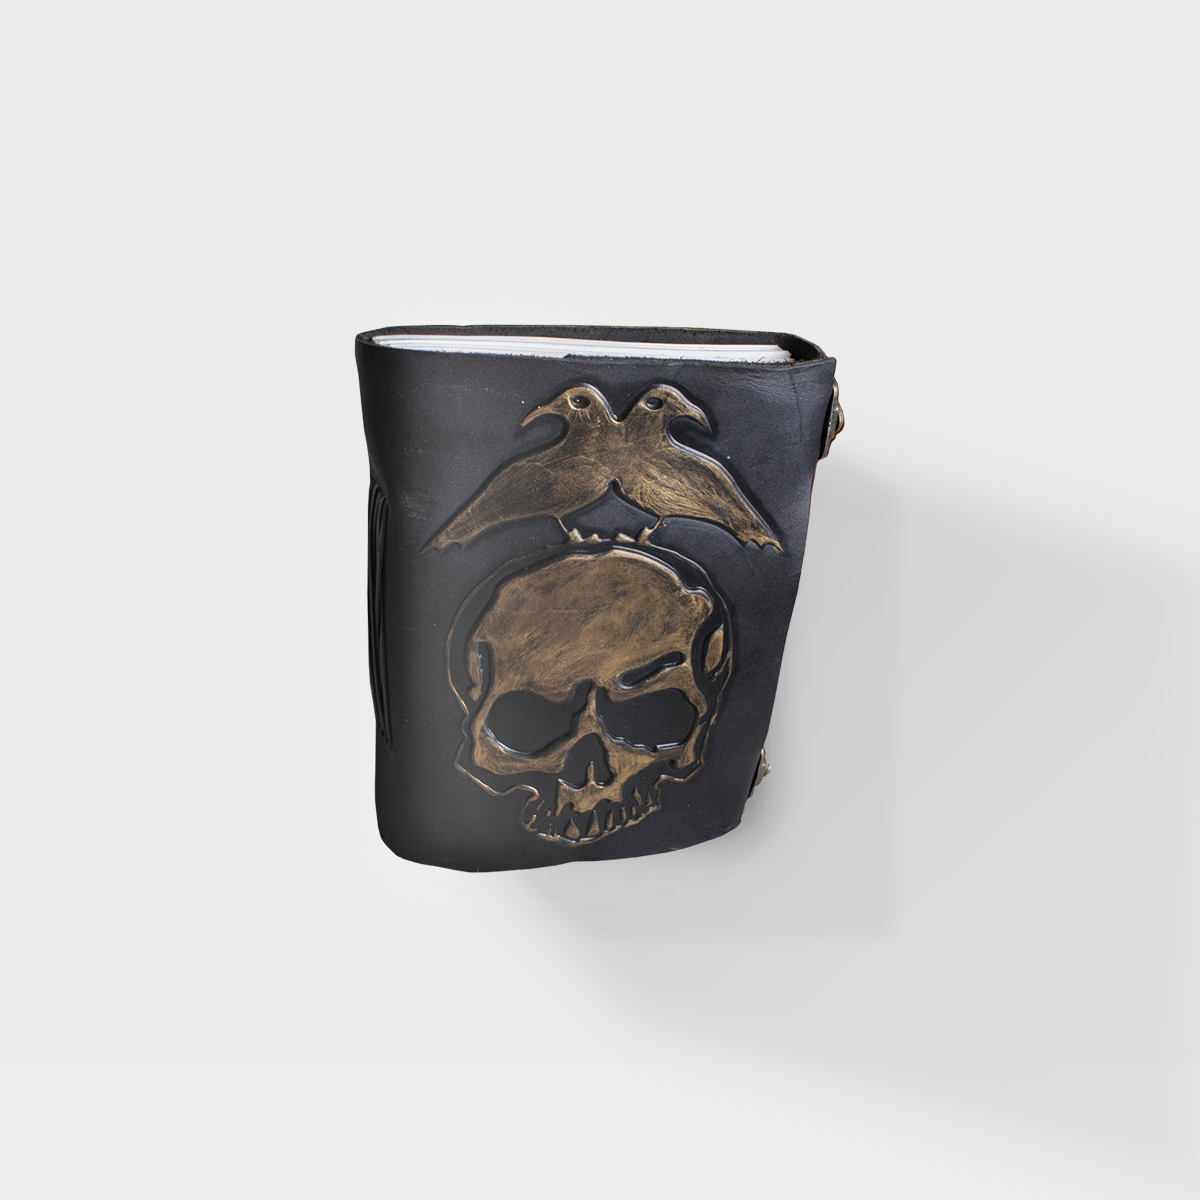 Nordic Raven and Skull - 9x6 - Black Large Leather Journal